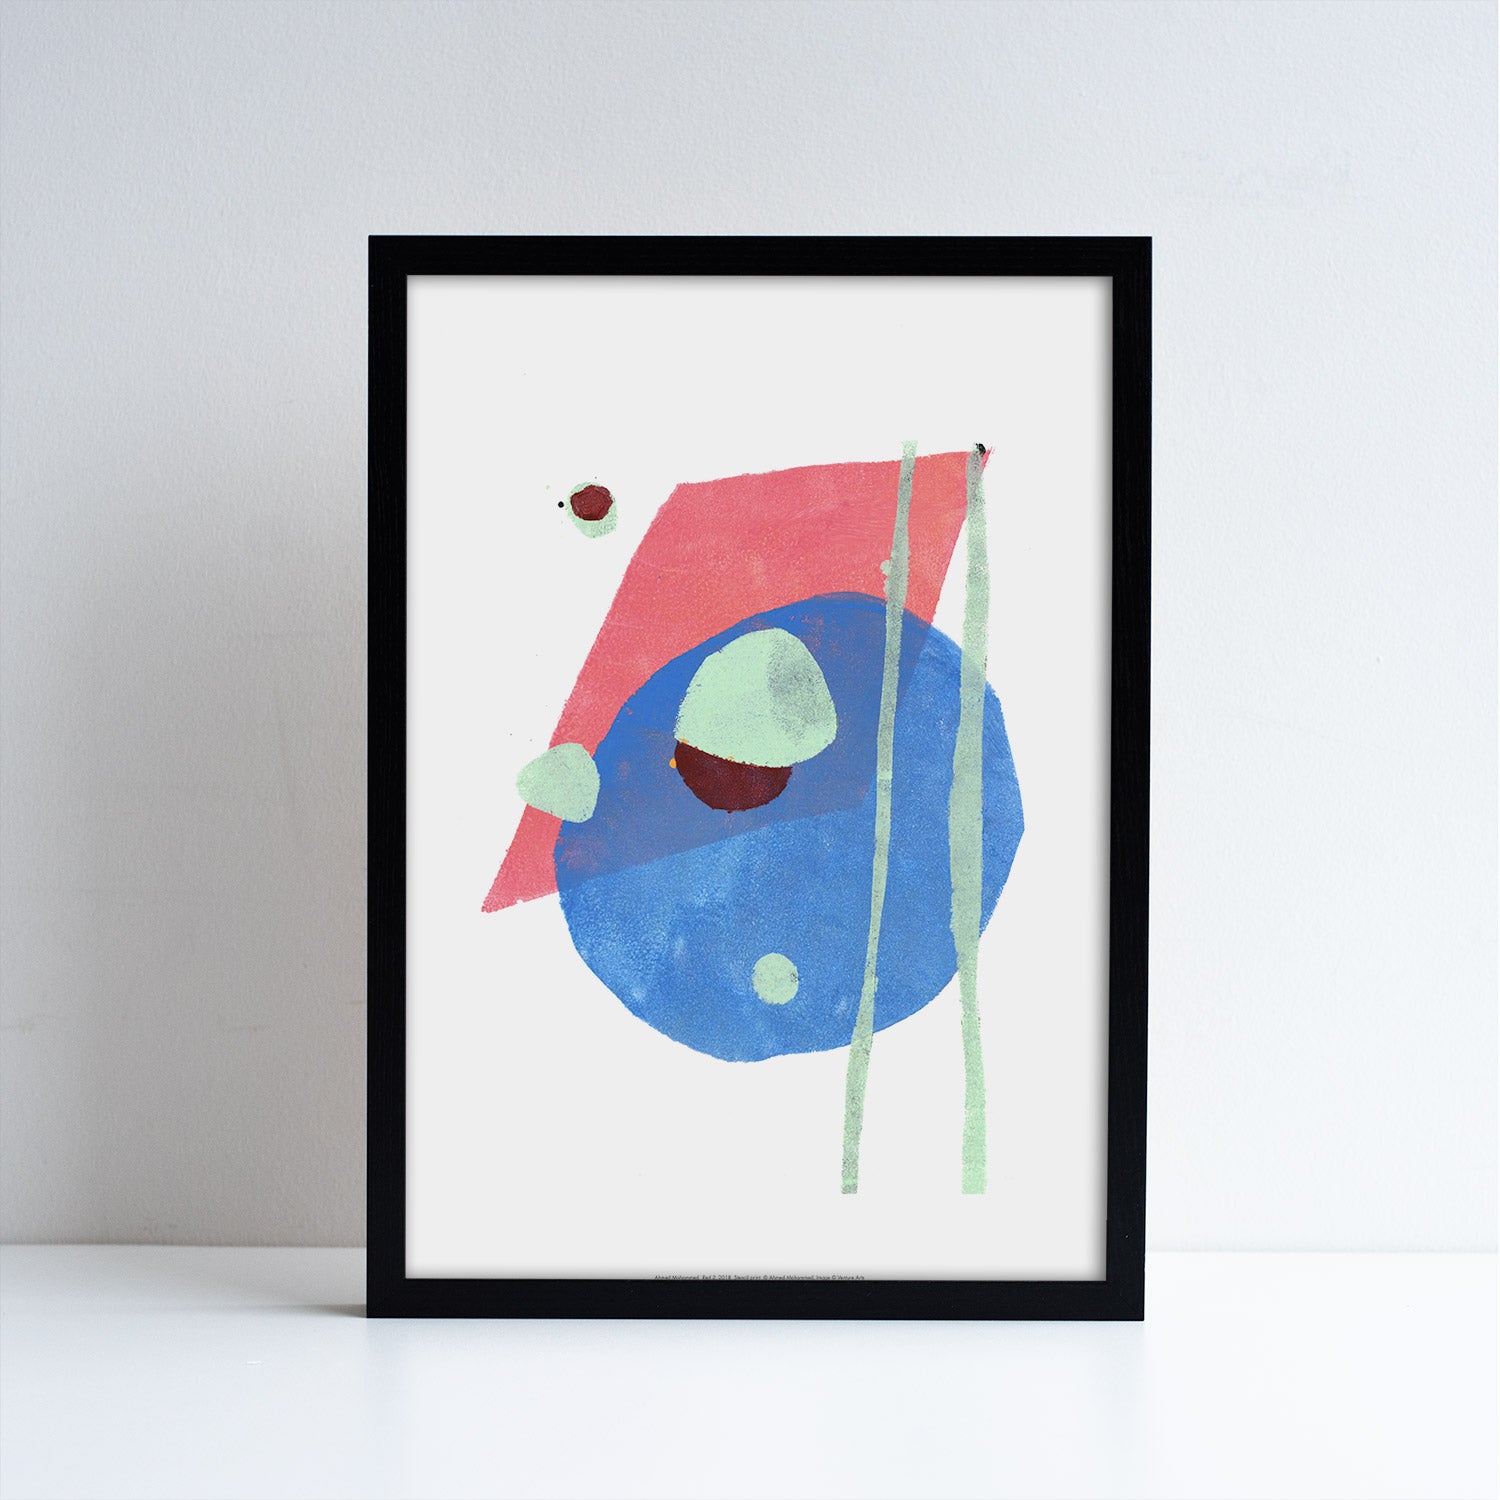 Reproduction of an abstract artwork by Ahmed Mohammed, abstract shapes in blue, green and pink. Placed in a black frame.